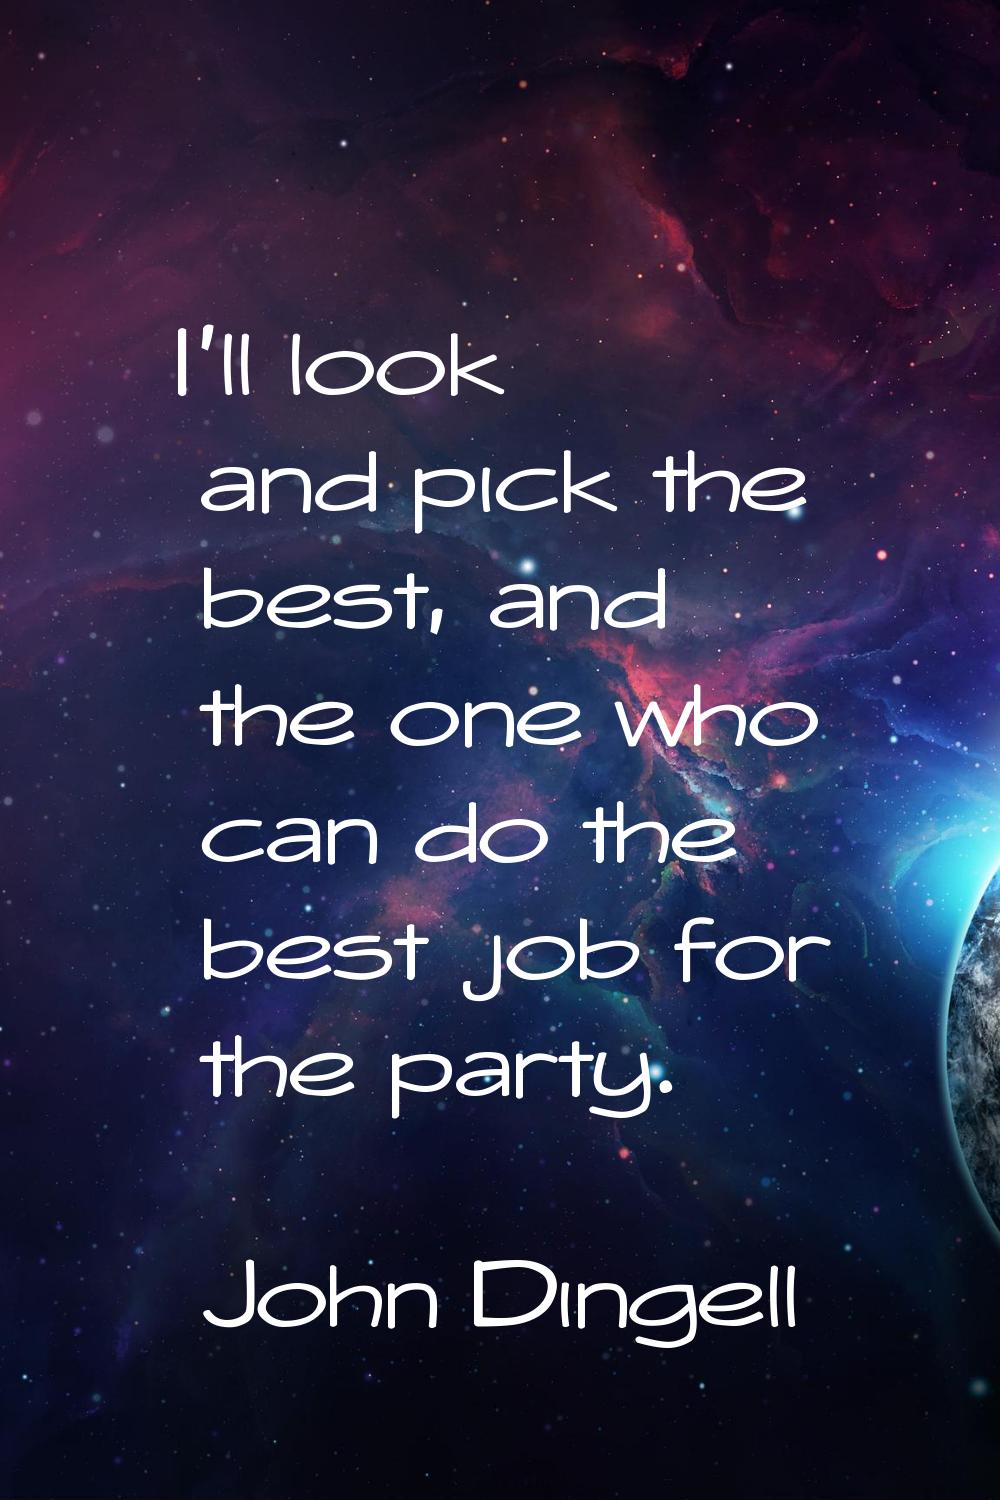 I'll look and pick the best, and the one who can do the best job for the party.